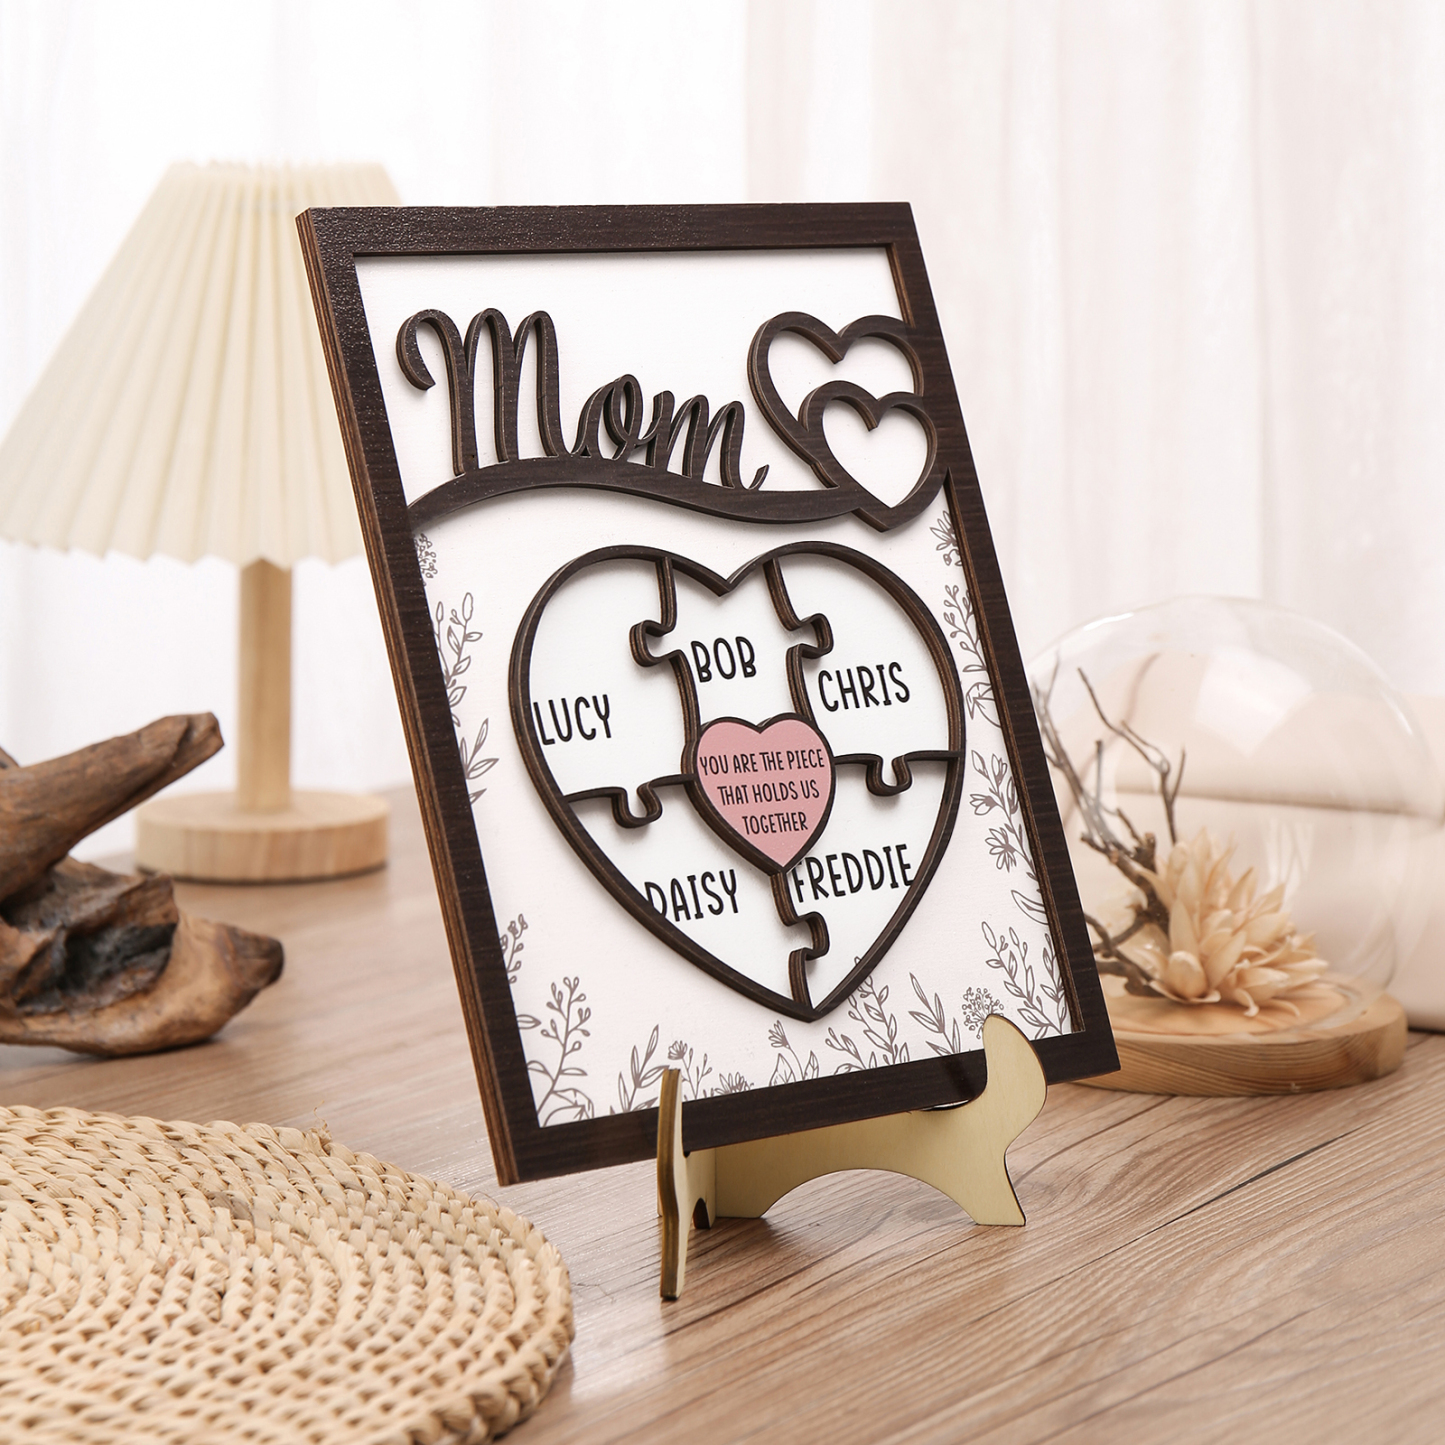 5 Names - Personalized Home Frame Wooden Decoration Customizable with 2 Texts, Love Pieces Wooden Board Painting for Mom